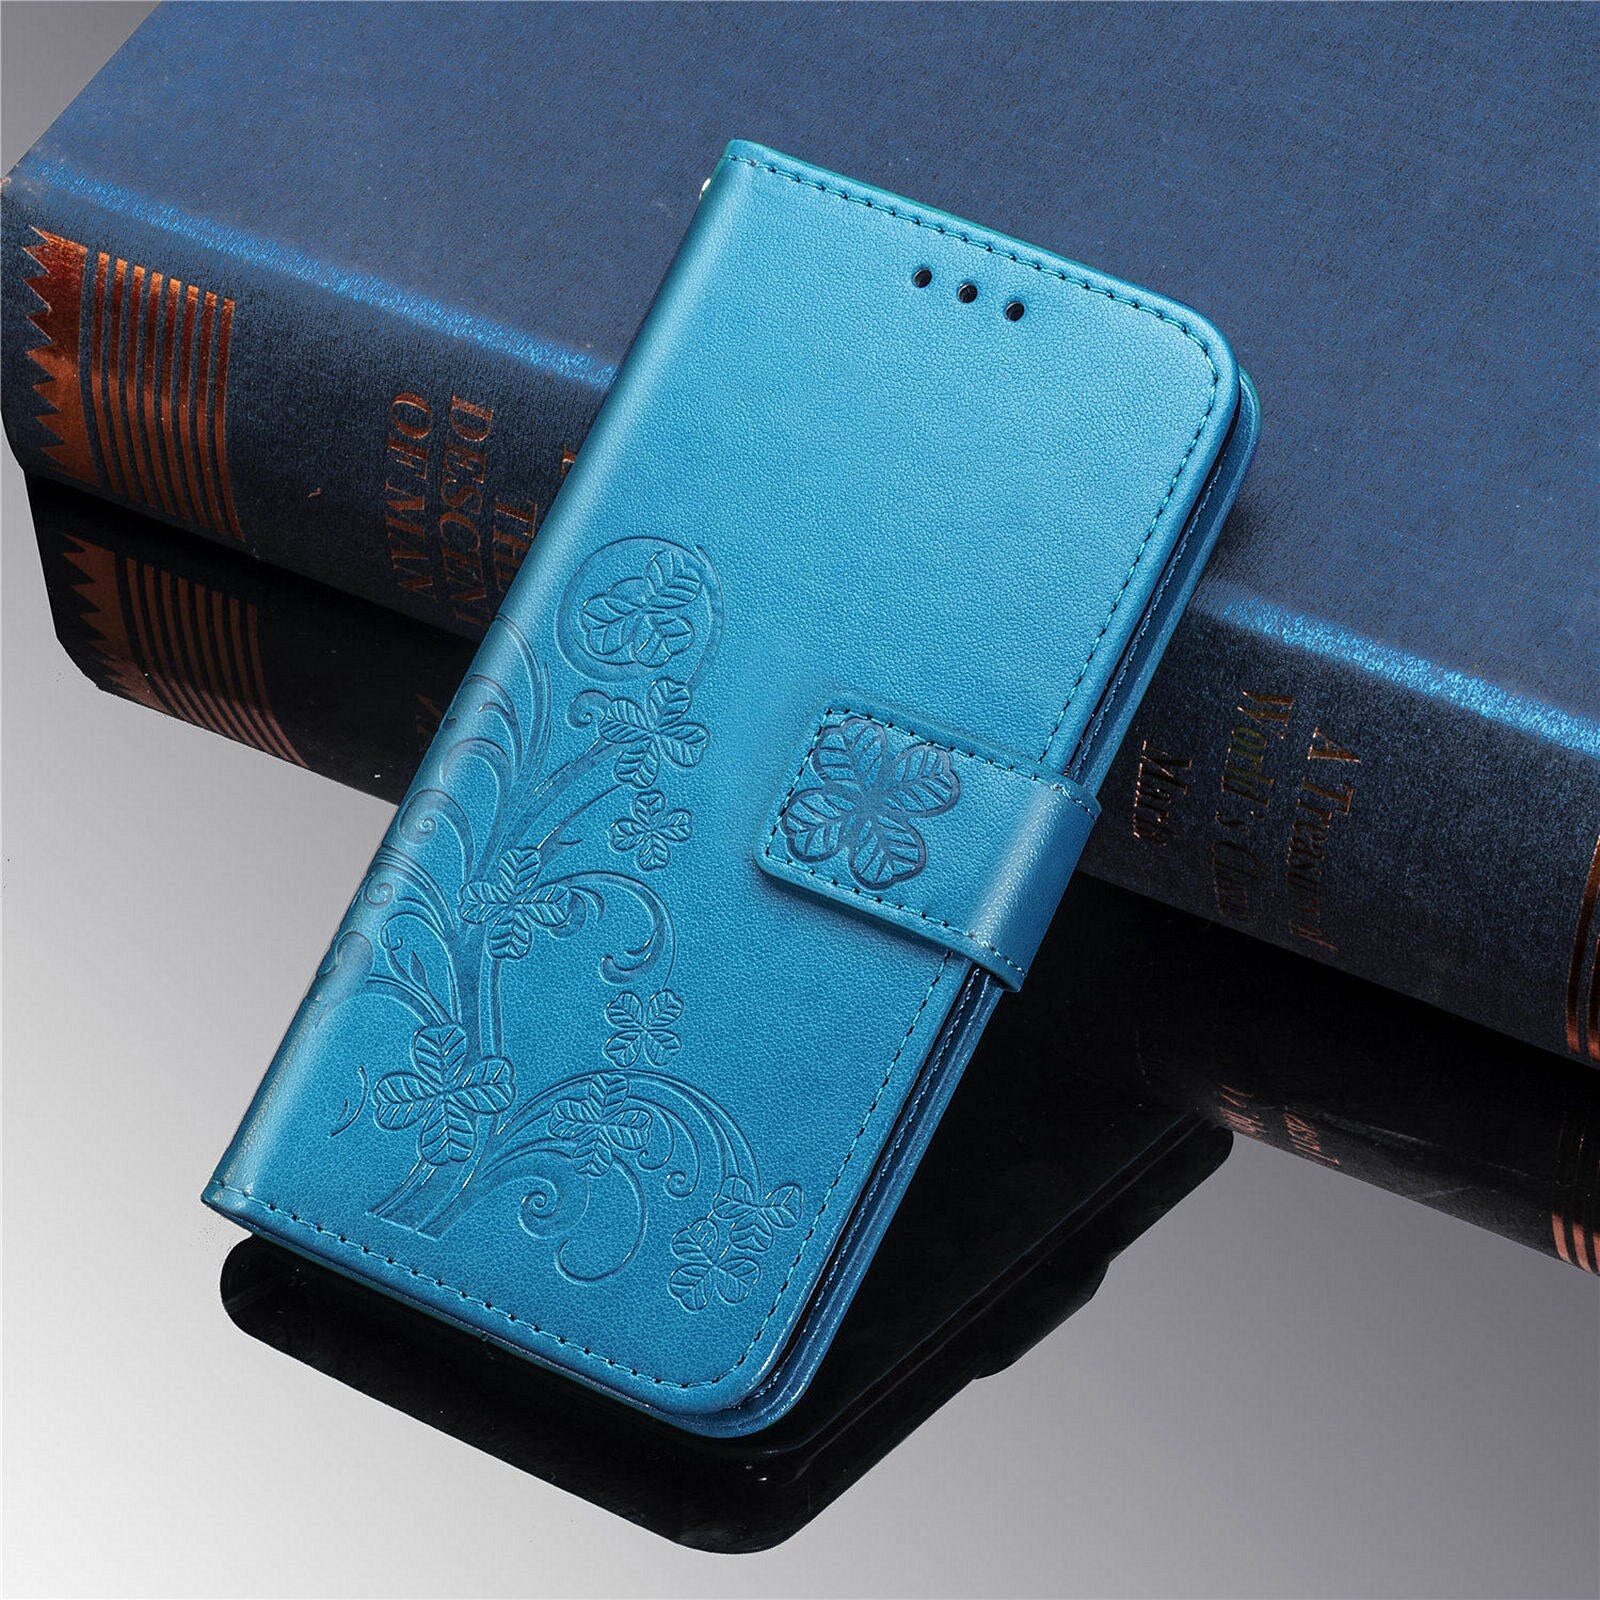 Embossed 3D Flower Case for Samsung Galaxy Z Fold 4 Fold 3 Leather Wallet Phone Case Bag Cover - 0 For Galaxy Z Fold 3 / Blue / United States Find Epic Store